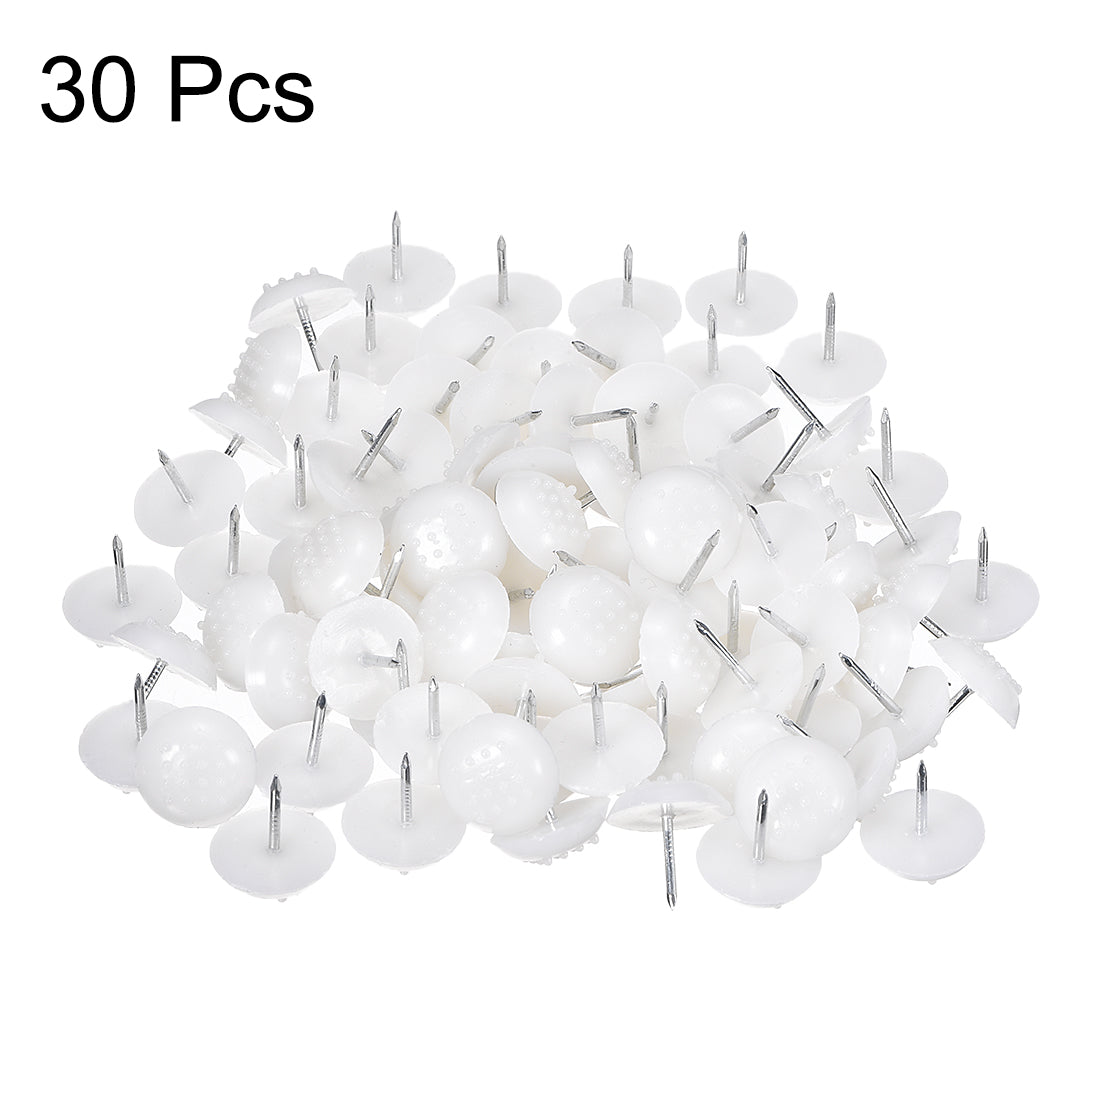 uxcell Uxcell Furniture Feet Nail Chair Table Leg Protector Pad 18mm Dia White Plastic 30pcs